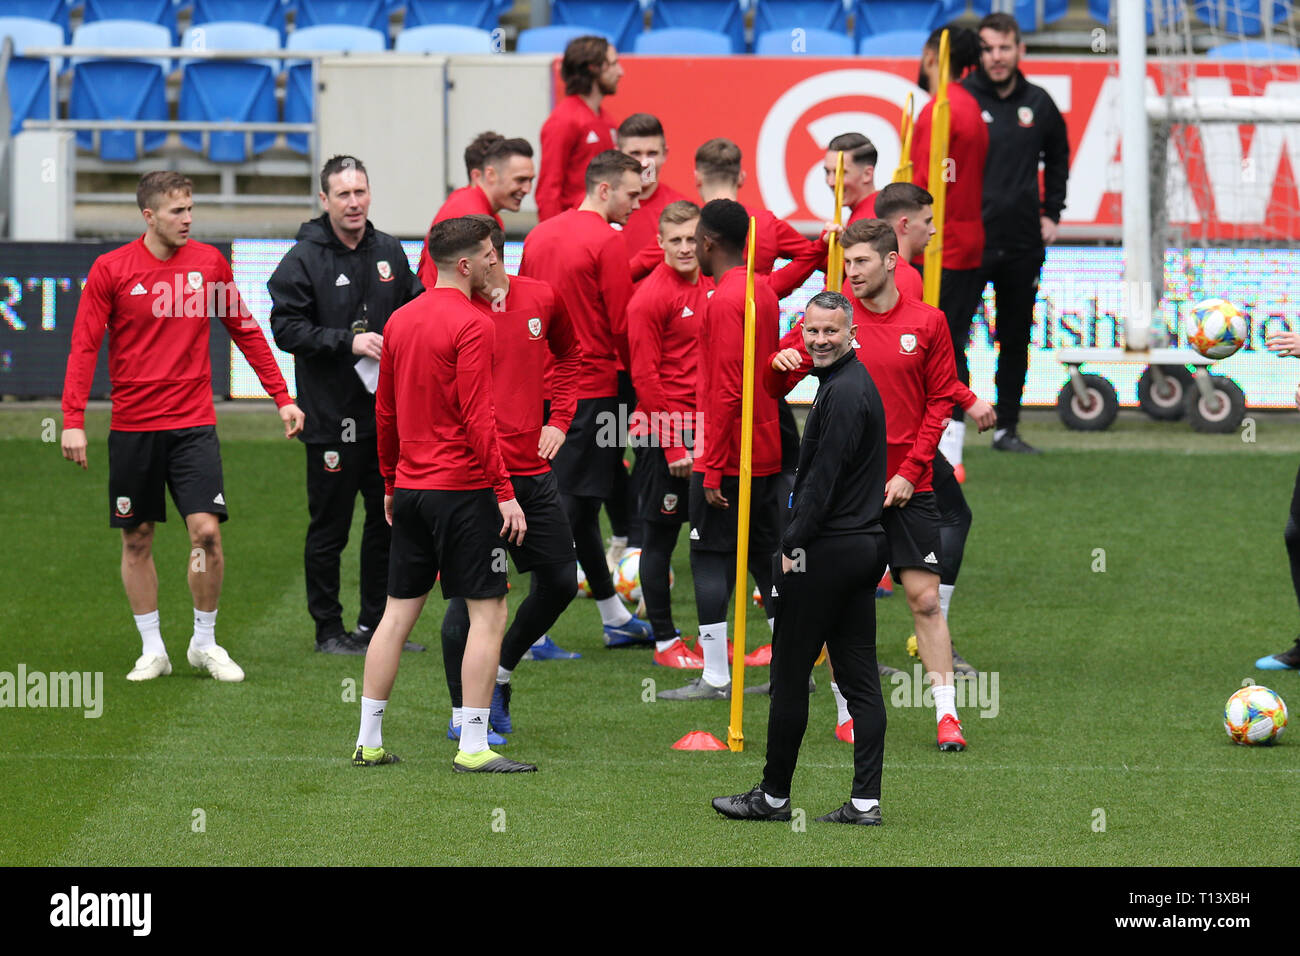 Cardiff, UK. 23rd Mar, 2019. Ryan Giggs, the Wales football team manager during the Wales football squad training at the Cardiff City Stadium in Cardiff, South Wales on Saturday 23rd March 2019. the team are preparing for their UEFA Euro 2020 quailfier against Slovakia tomorrow. pic by Andrew Orchard/Alamy Live News Stock Photo